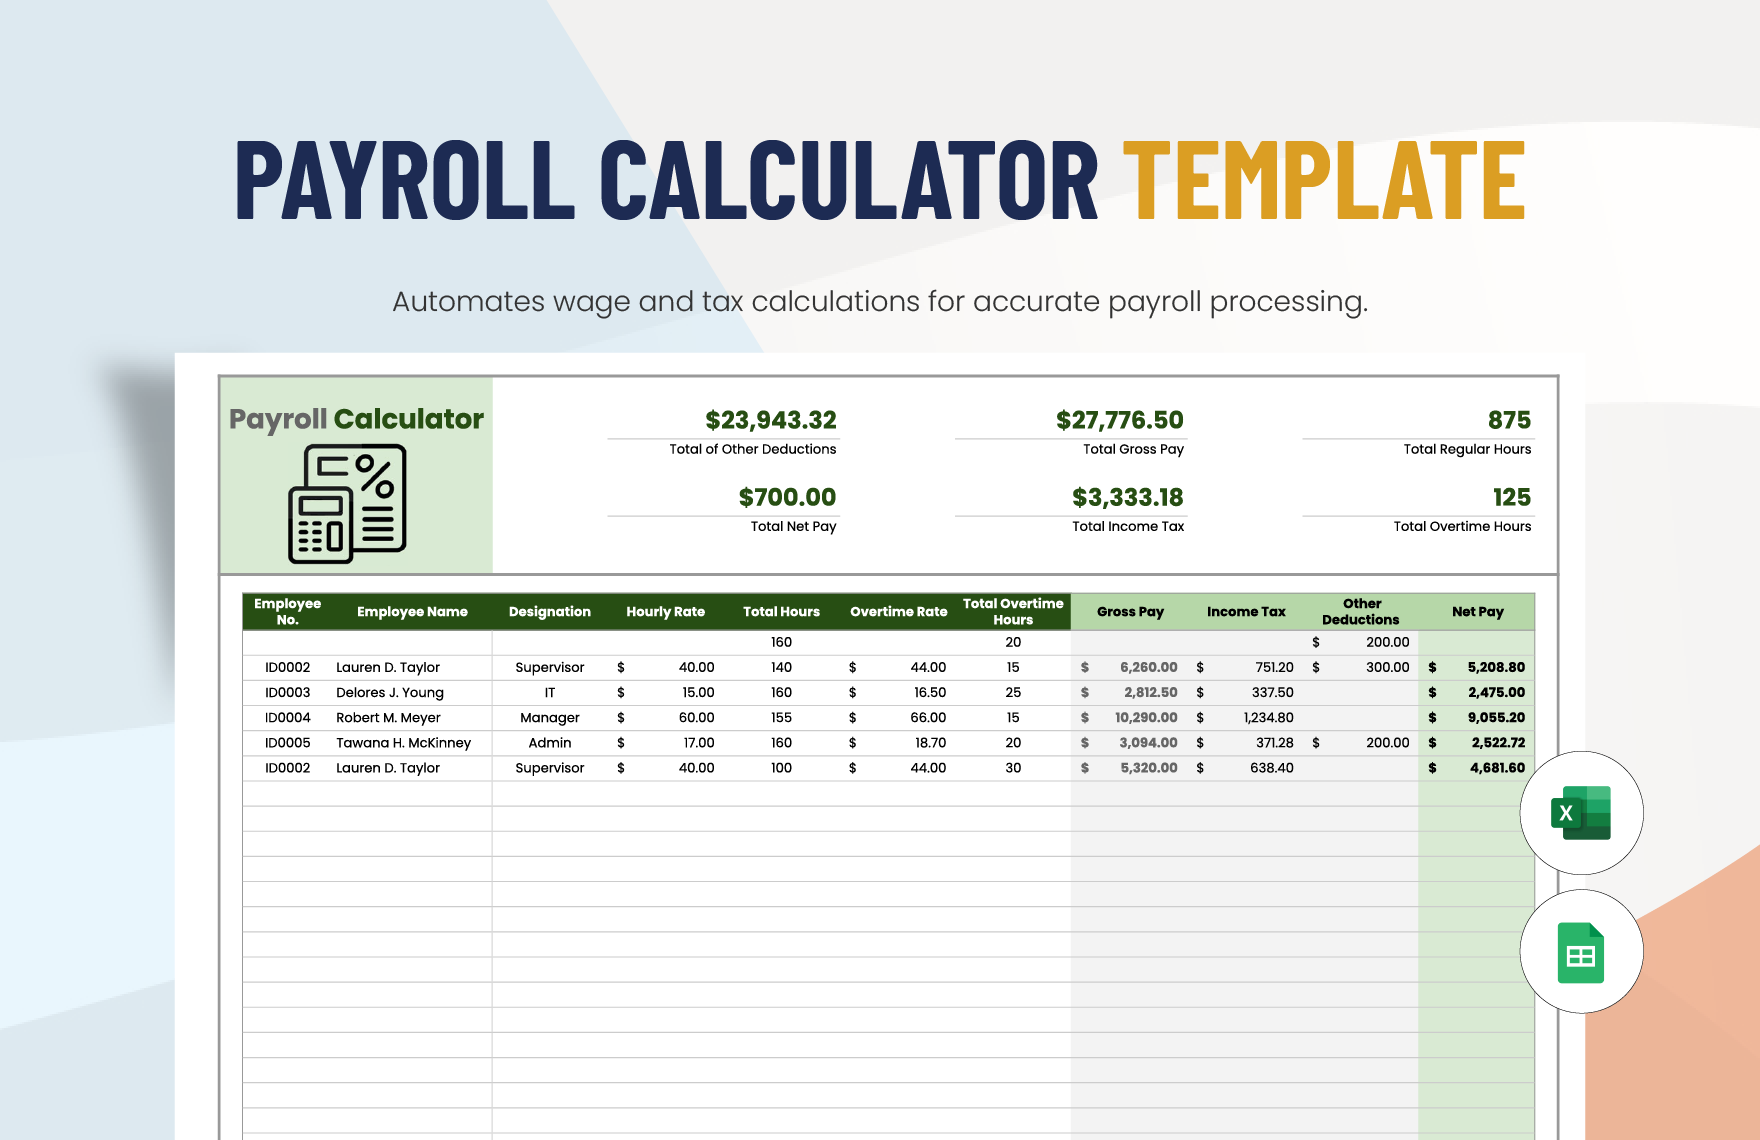 Payroll Calculator Template in Excel, Google Sheets